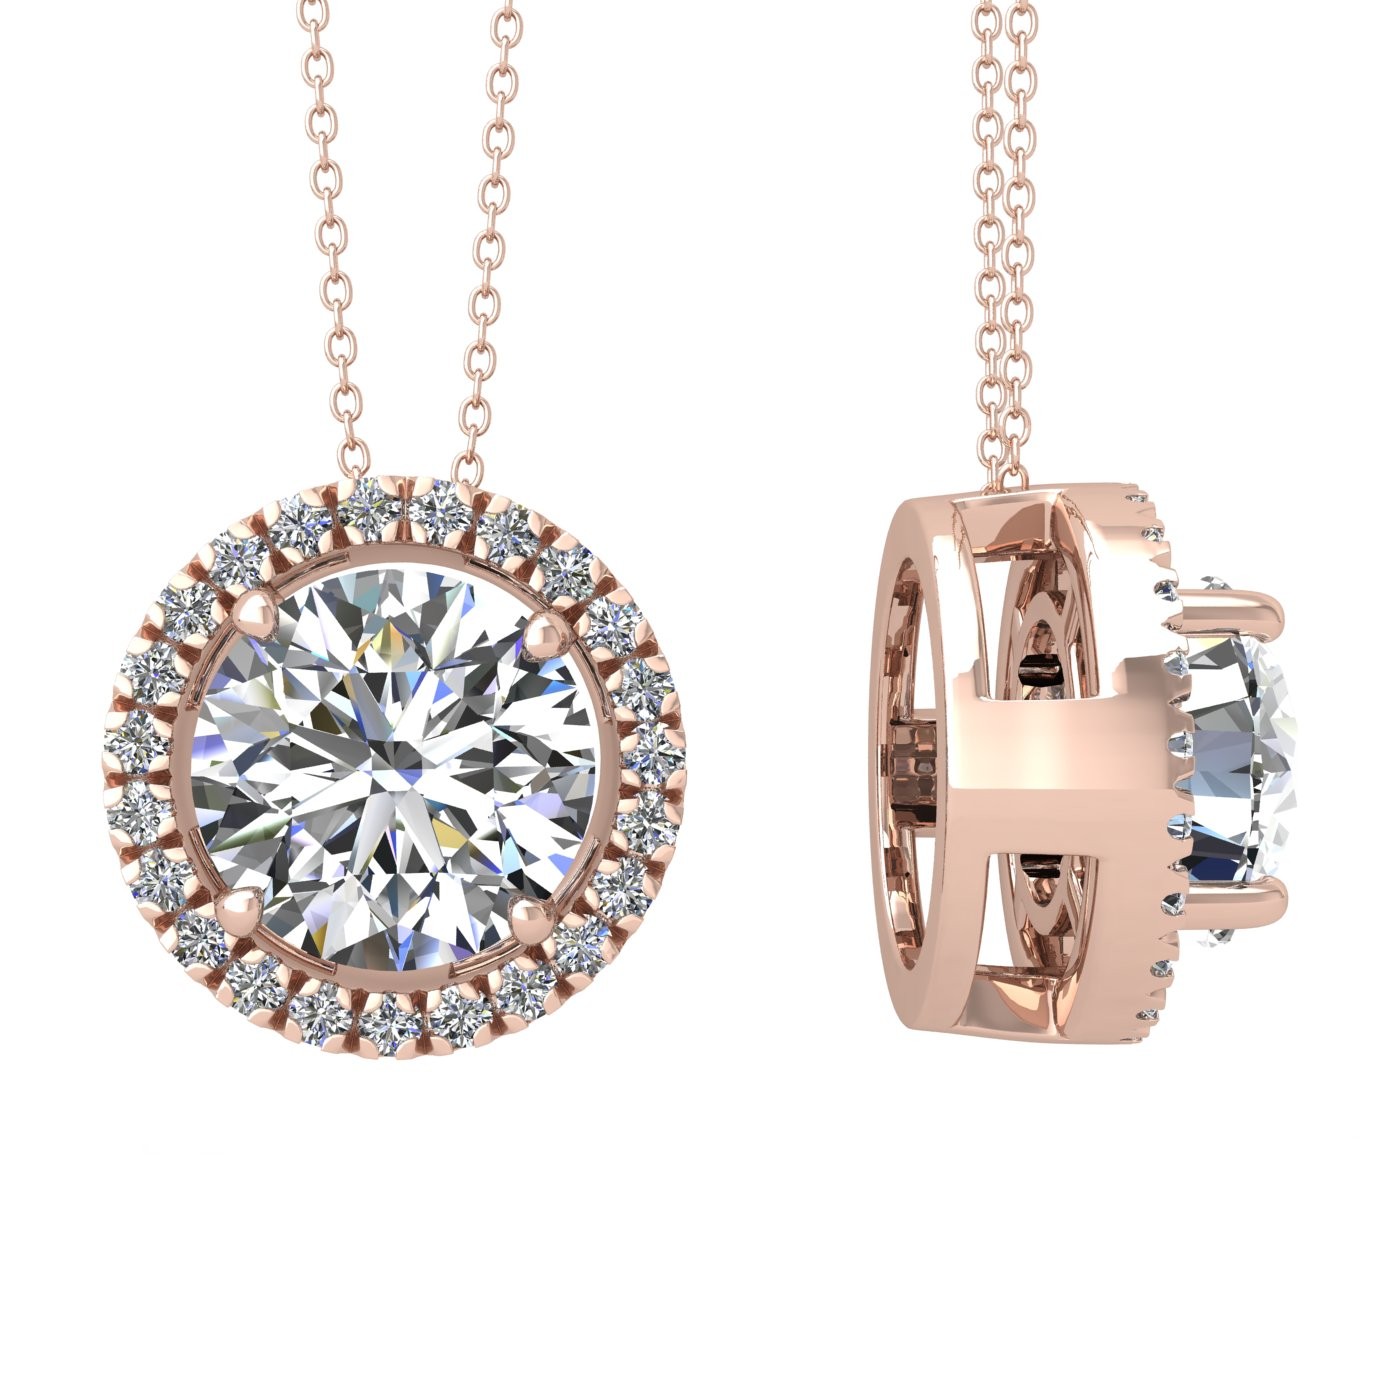 18k rose gold 0,3 ct 4 prong round shape diamond pendant with diamond pavÉ set halo including chain seperate from the pendant Photos & images